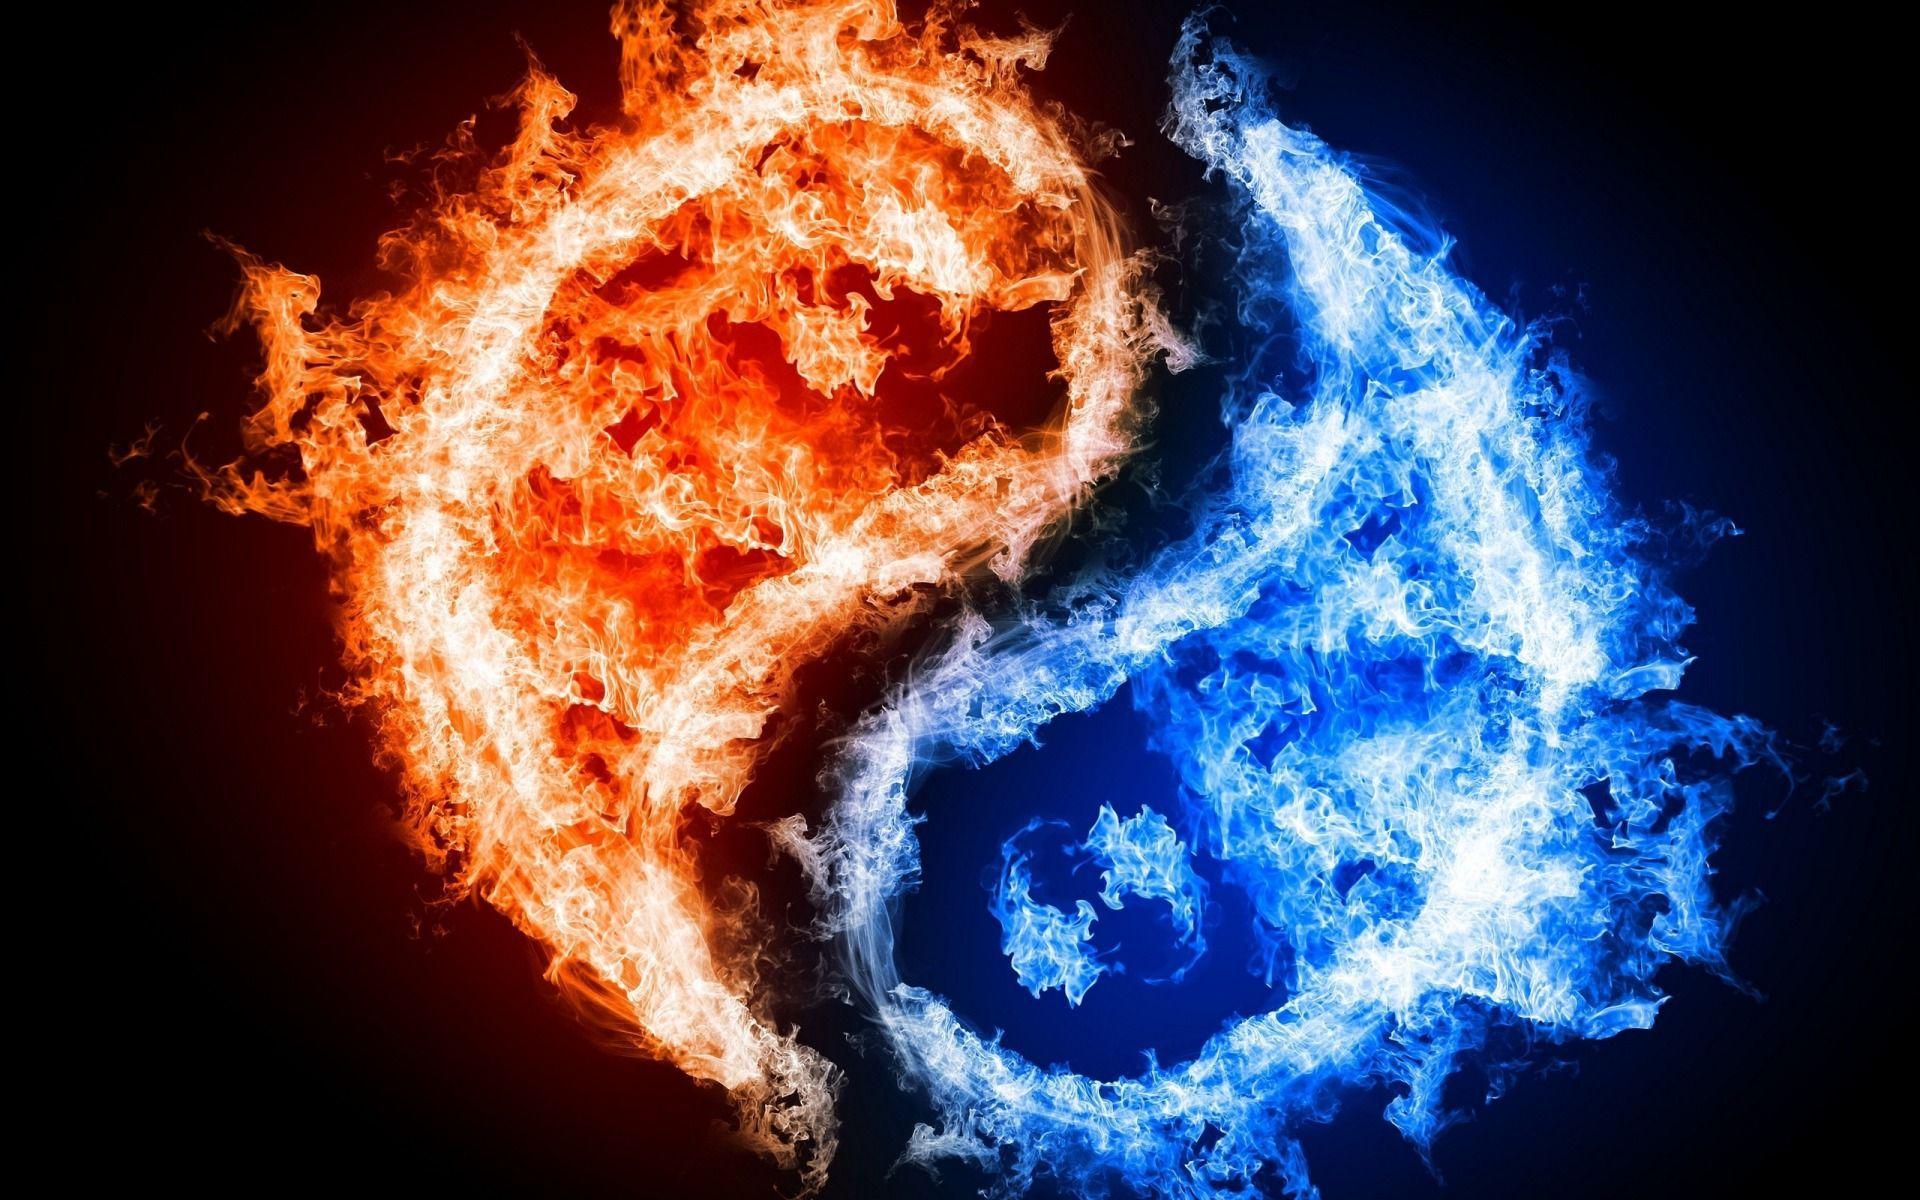 Blue and Red Fire Wallpaper. Decorate Your Desktop